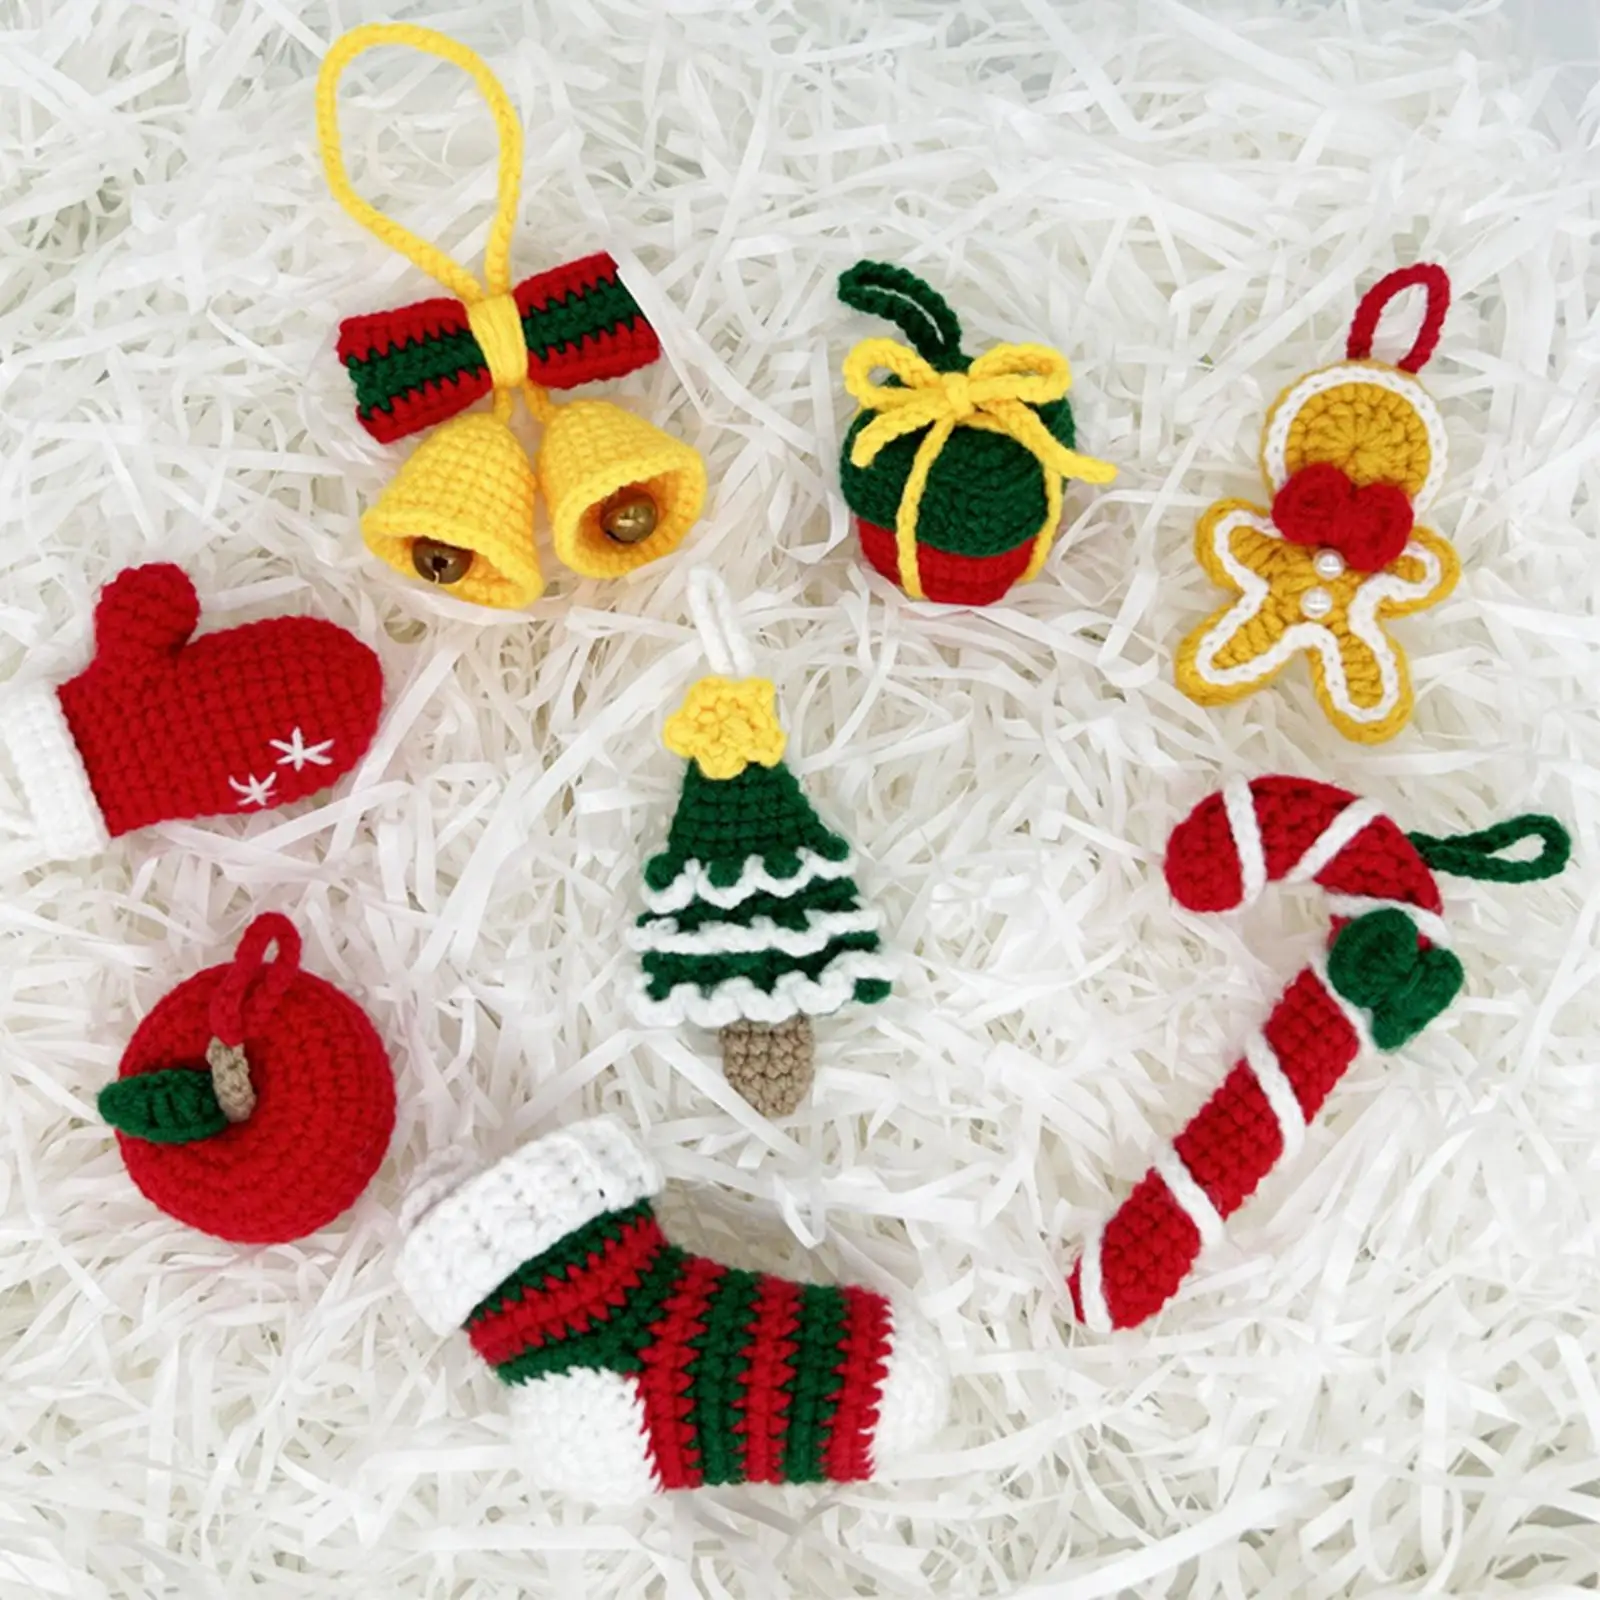 8x Christmas Crochet Kit Accessories Handmade Portable for Beginner Adult Kids for Party Favors Thanksgiving Christmas Holiday